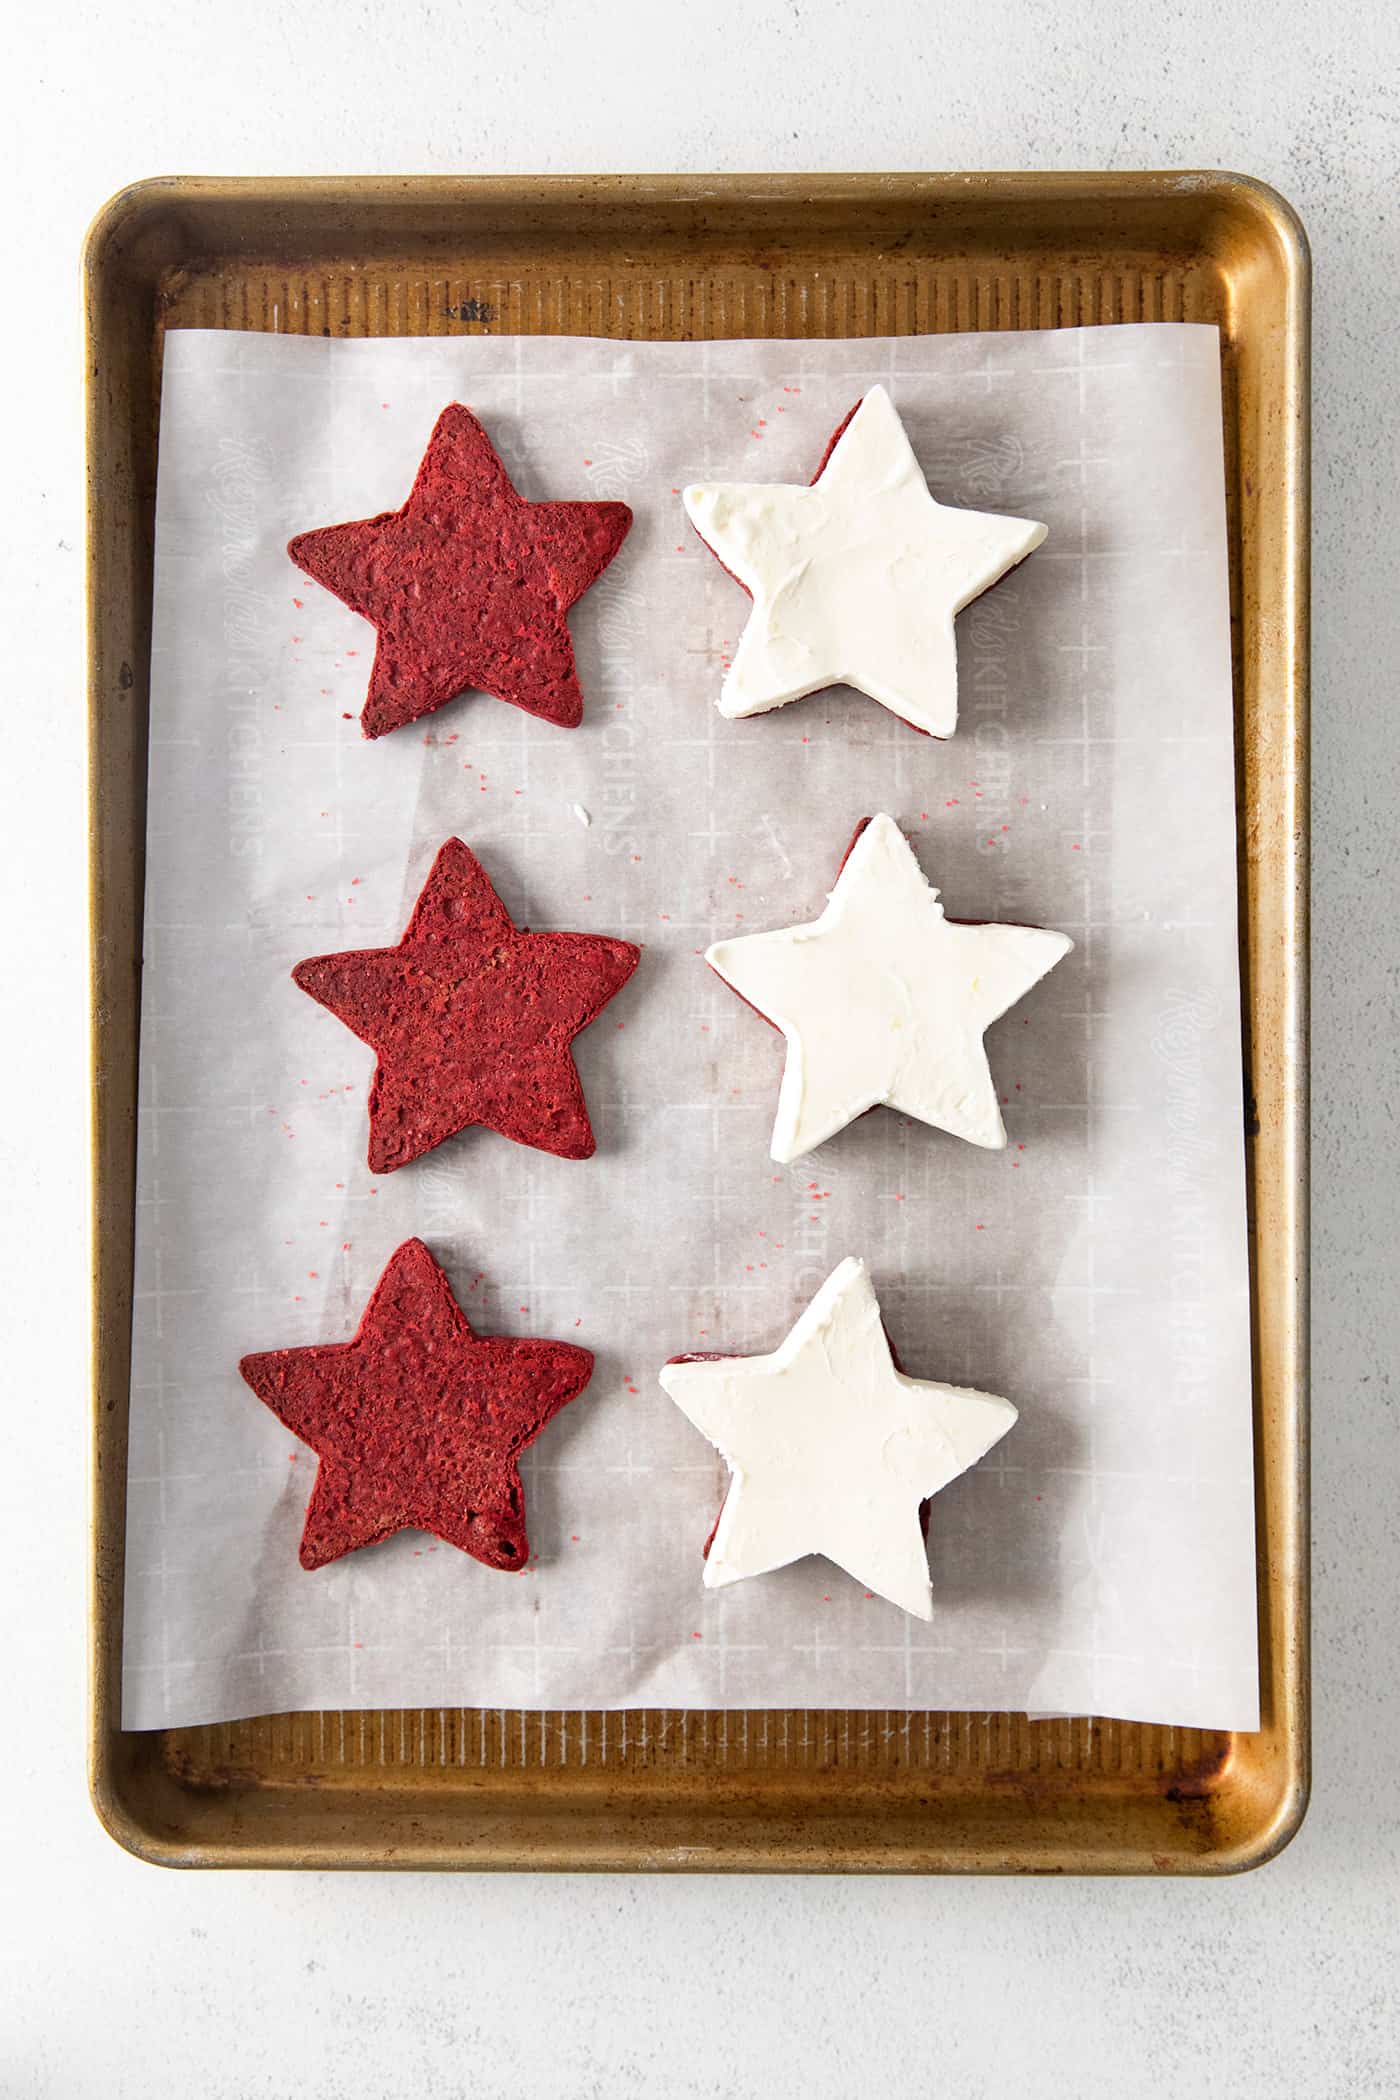 Star shaped ice cream cookies ready to be assembled